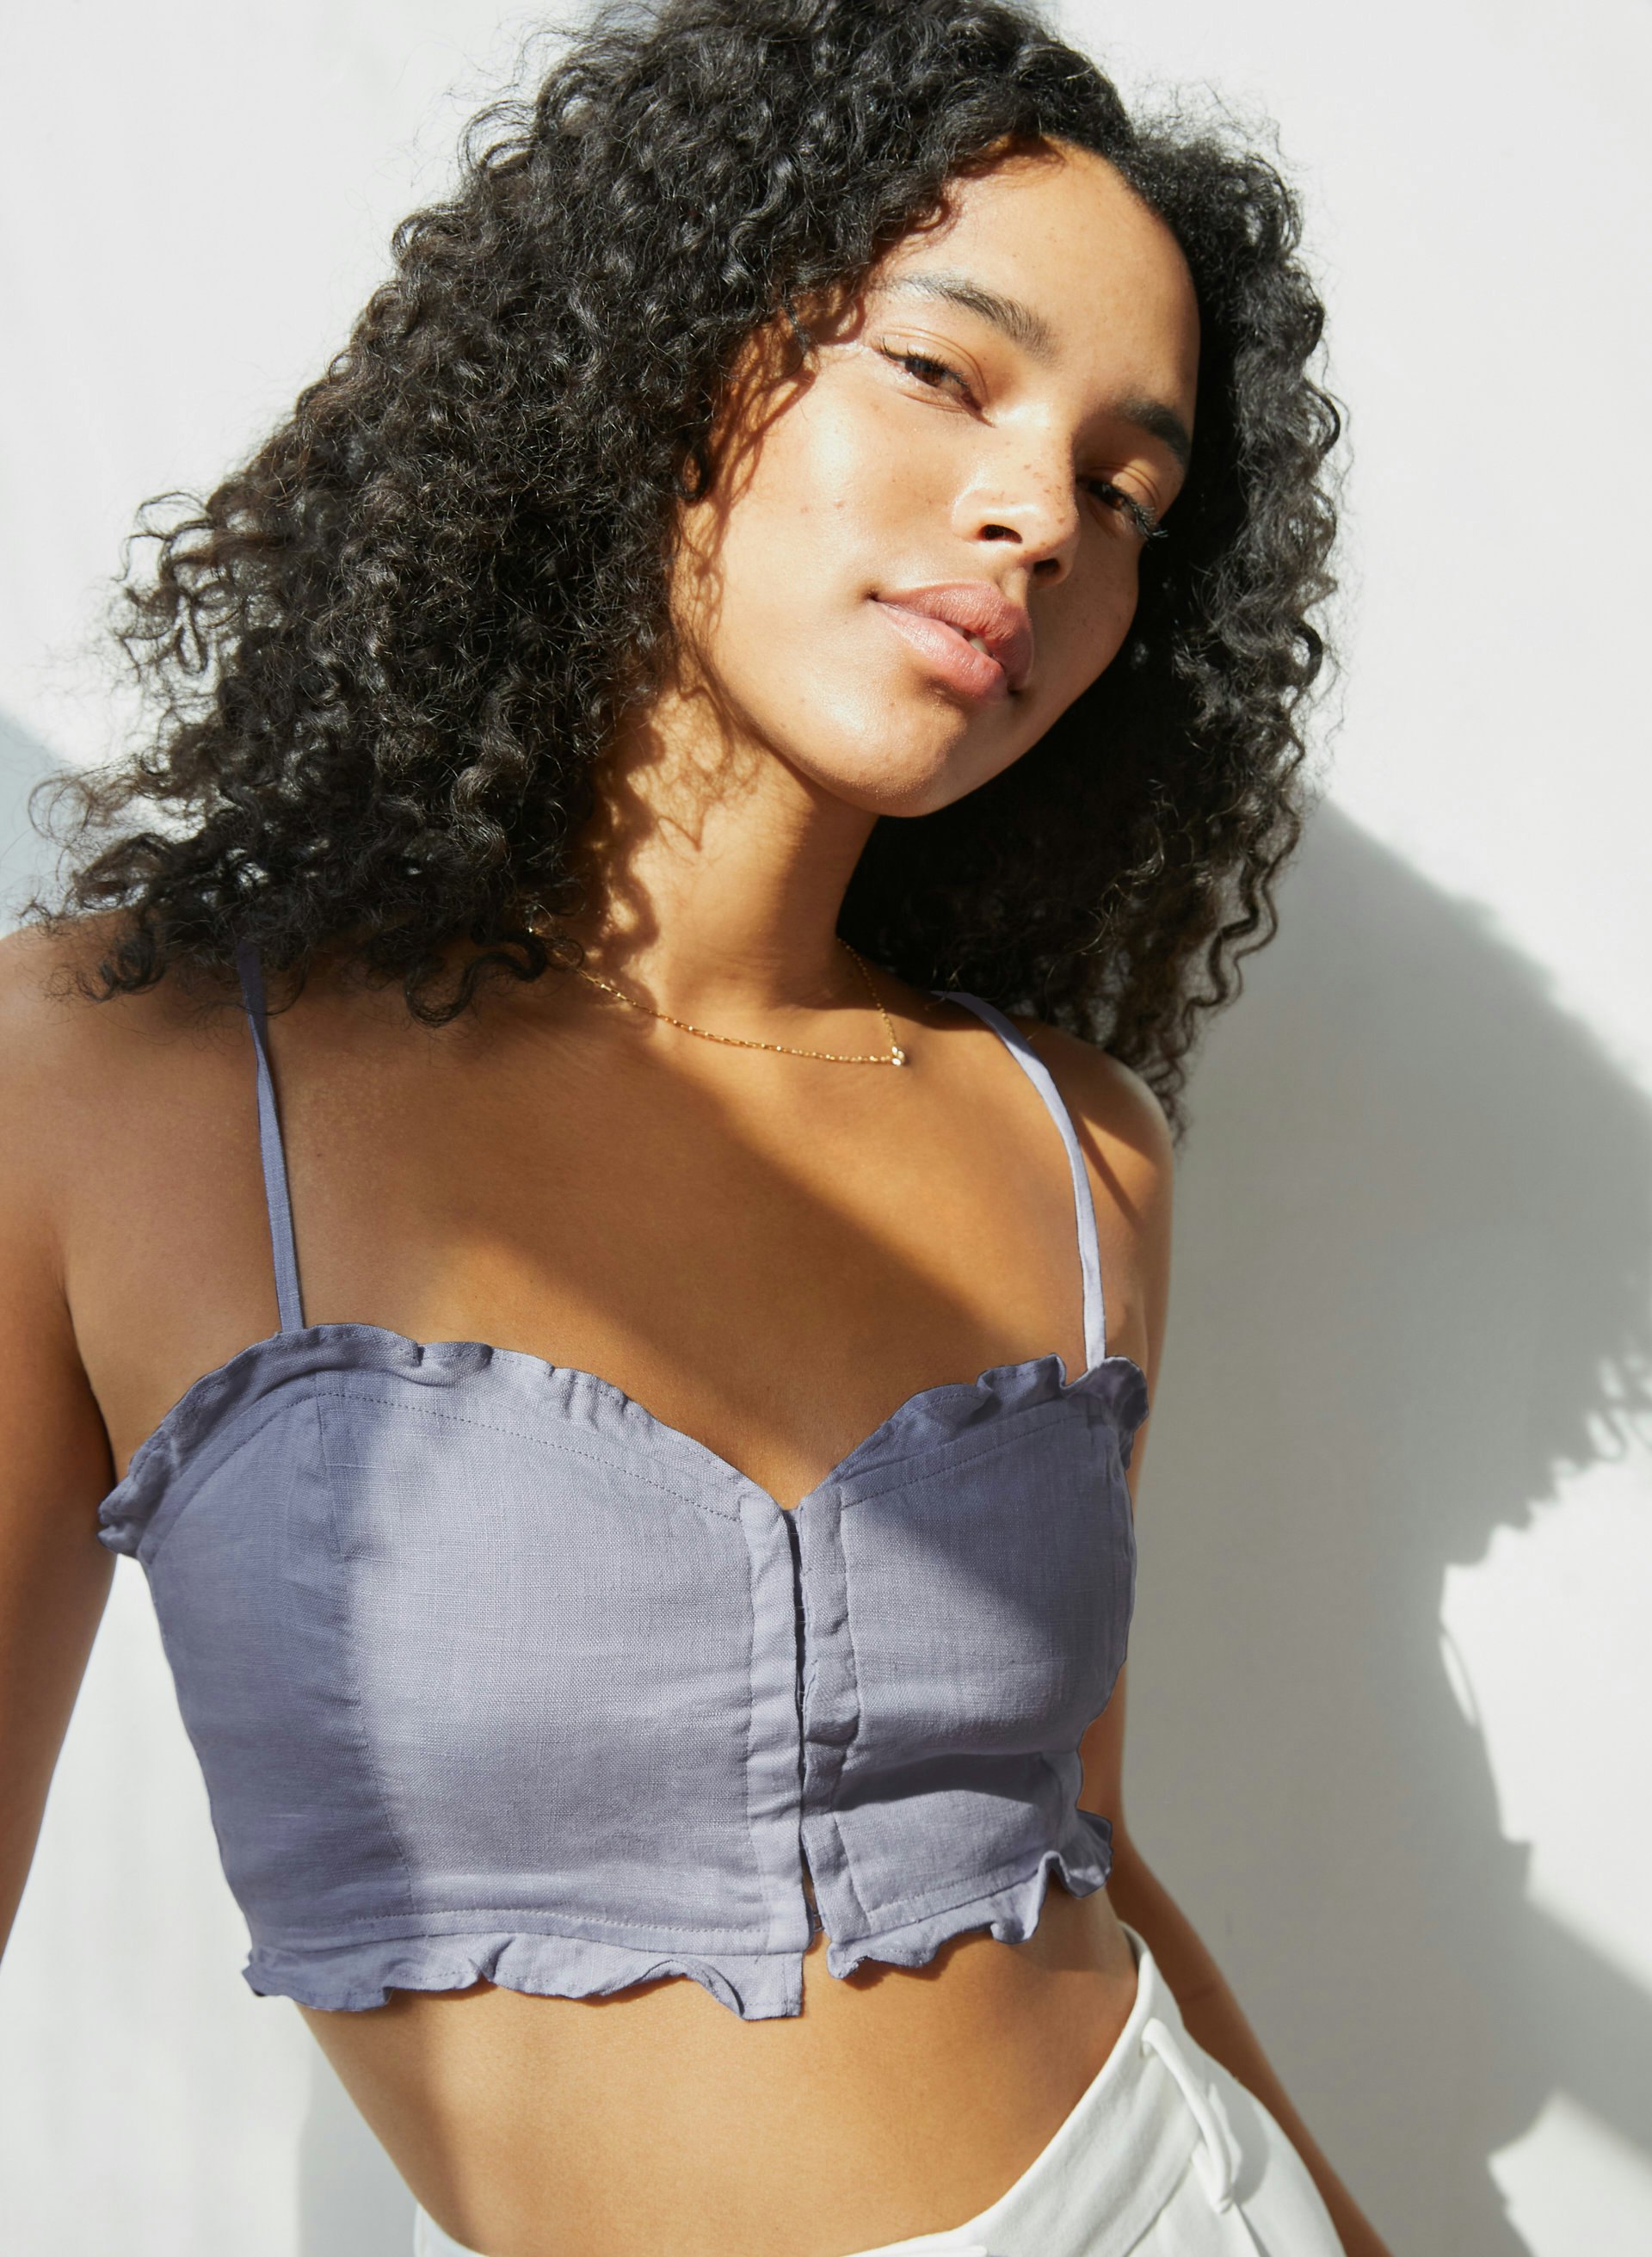 Bustier Tops Are Ruling Summer — 5 Ways to Wear The Trend